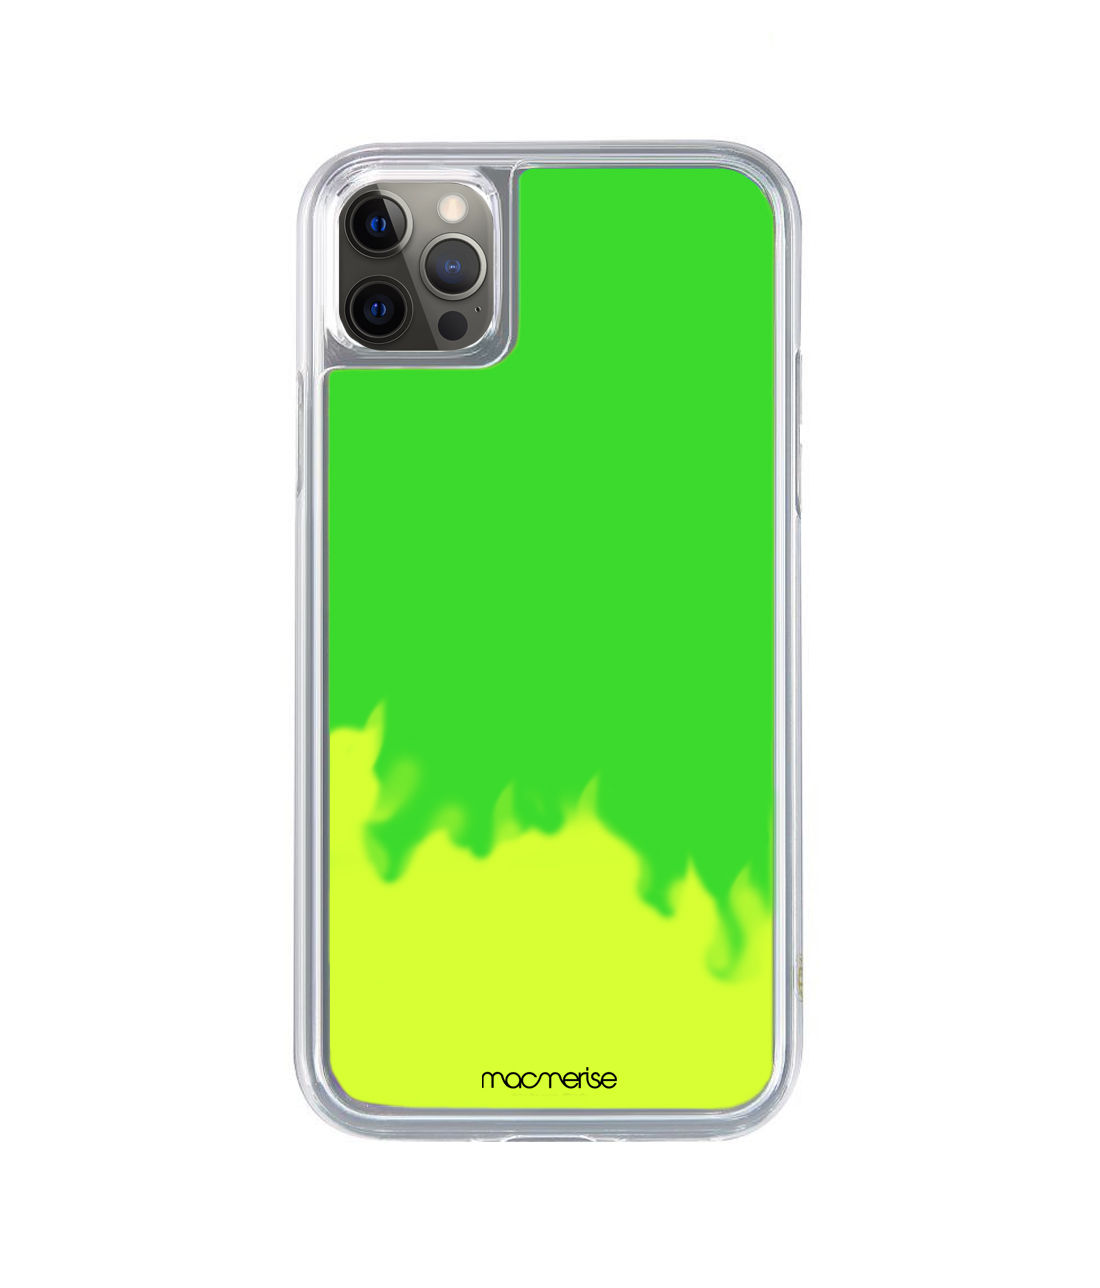 Neon Sand Green - Neon Sand Case for iPhone 12 Pro Max